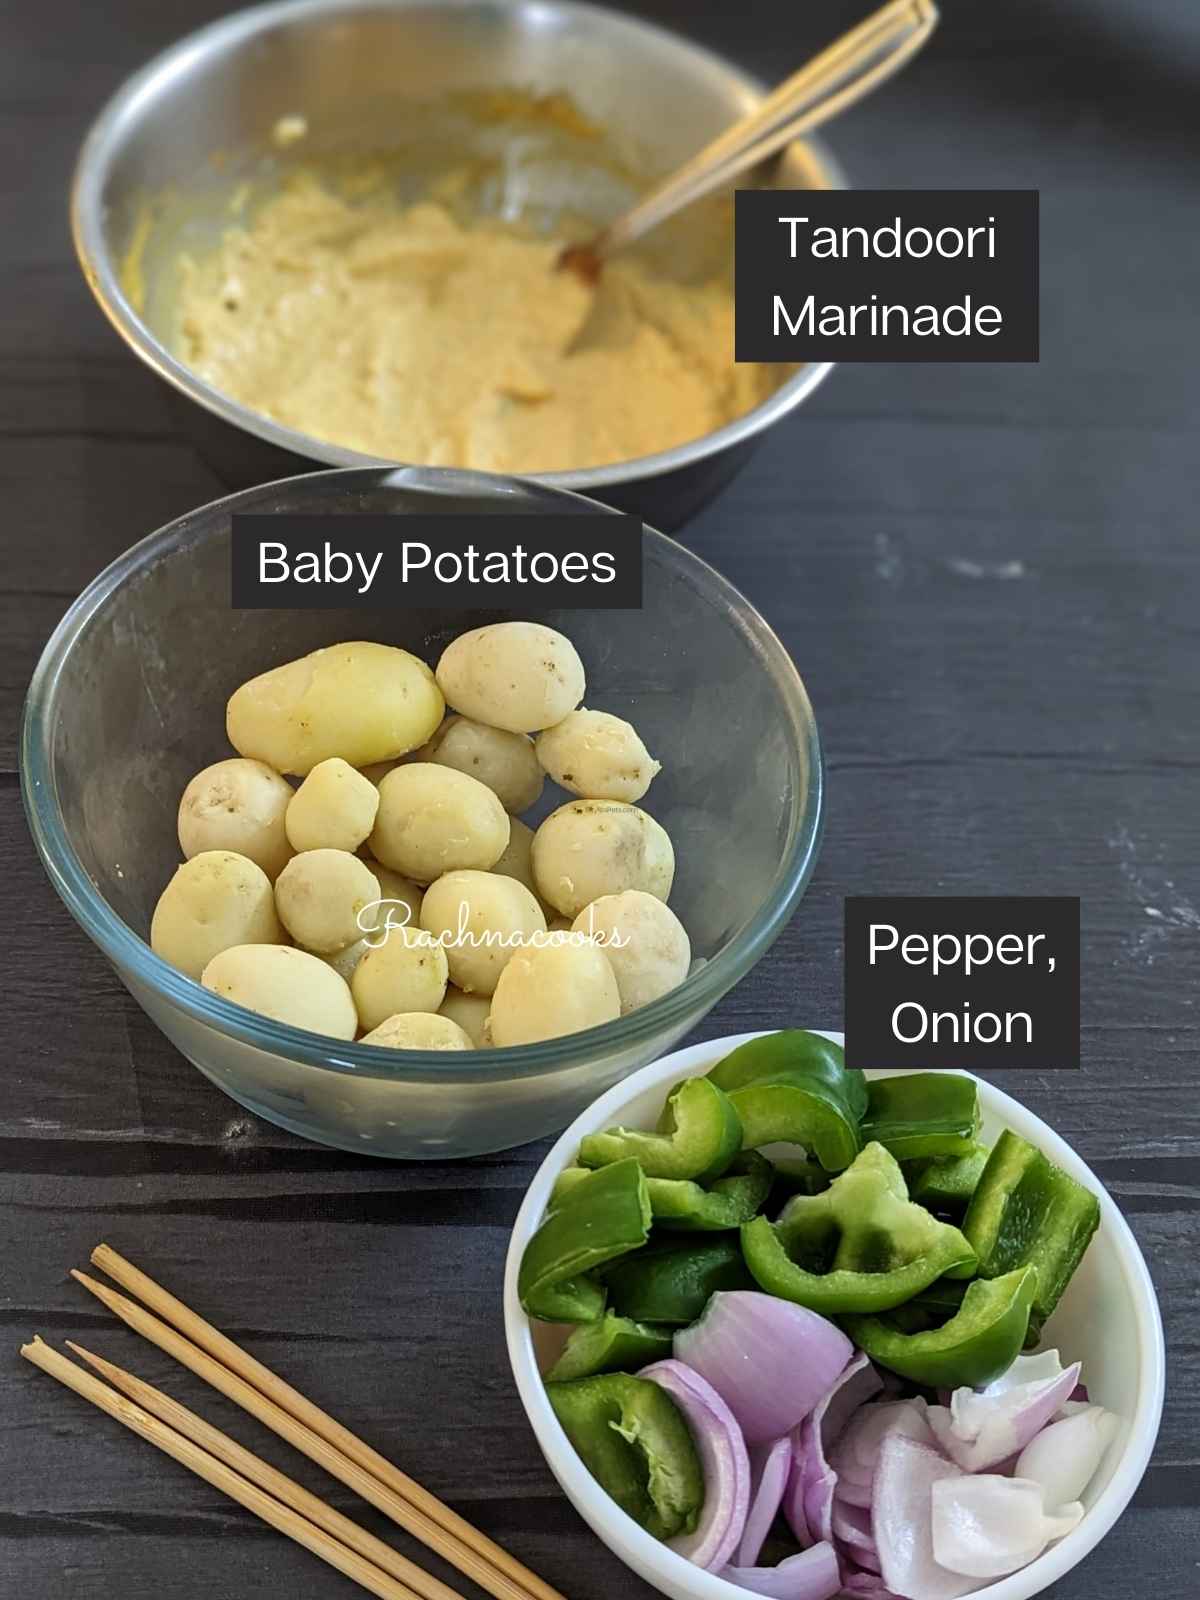 Ingredients to make tandoori aloo: marinade, baby potatoes, peppers and onion